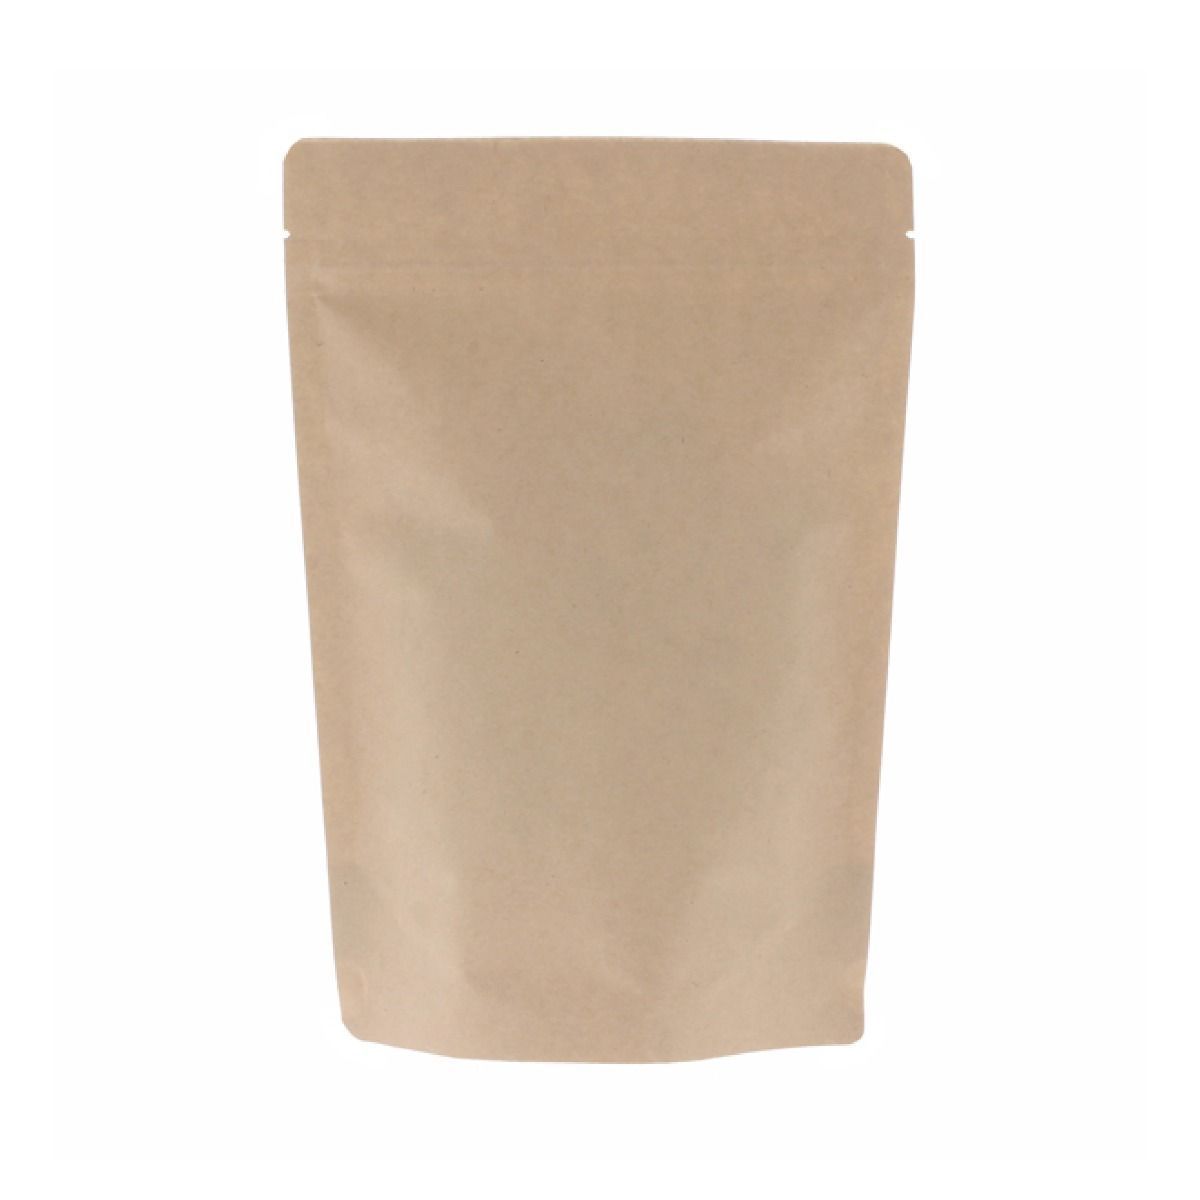 Stand-up pouch kraft paper brown (3-layers)